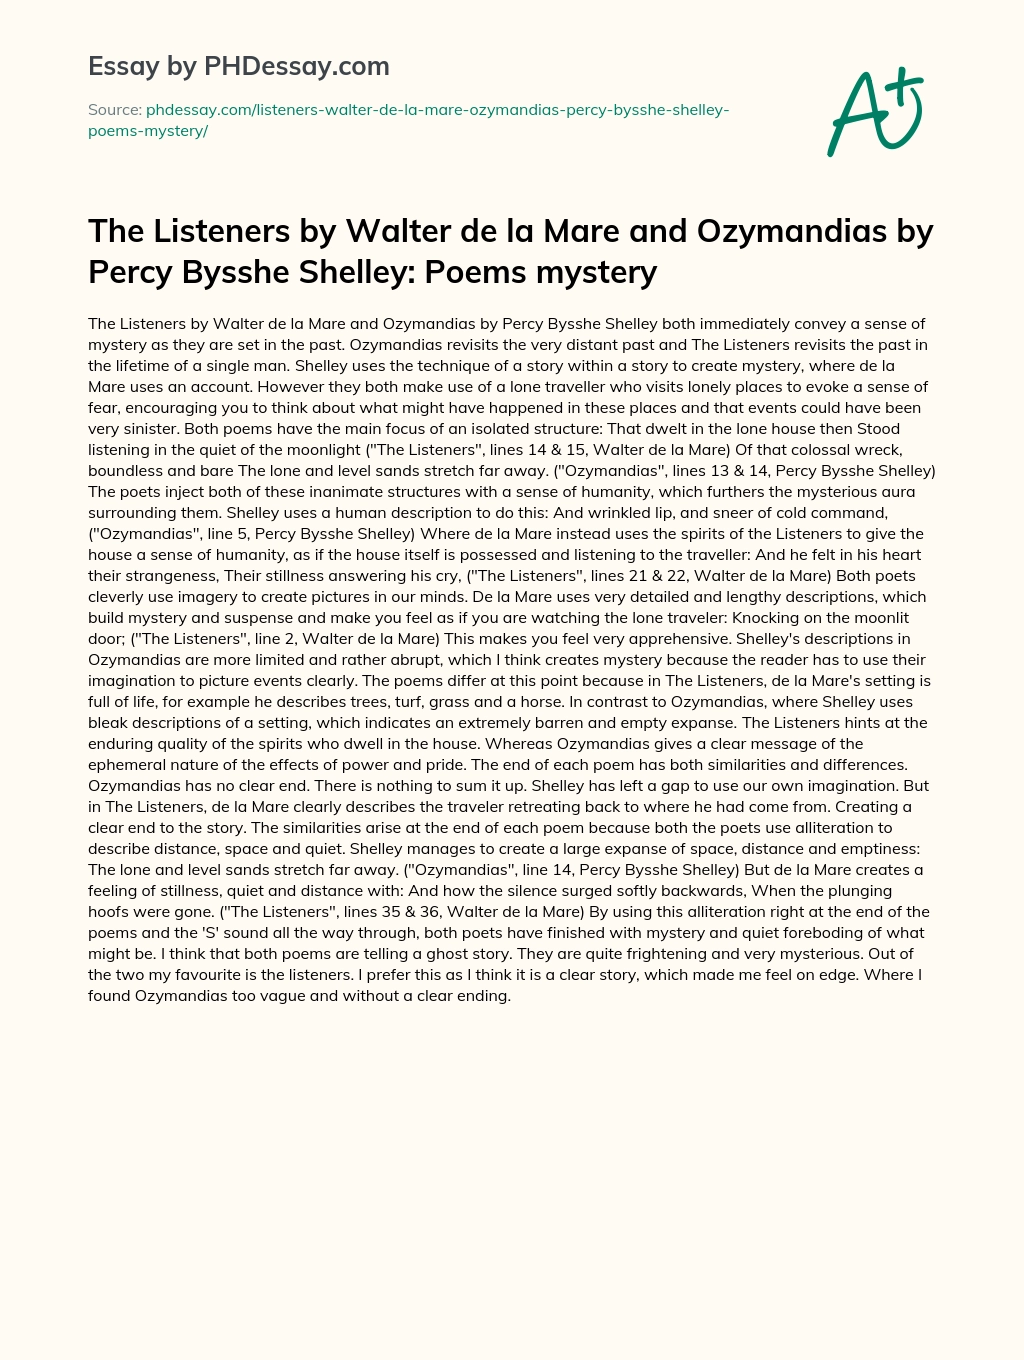 The Listeners by Walter de la Mare and Ozymandias by Percy Bysshe Shelley: Poems mystery essay